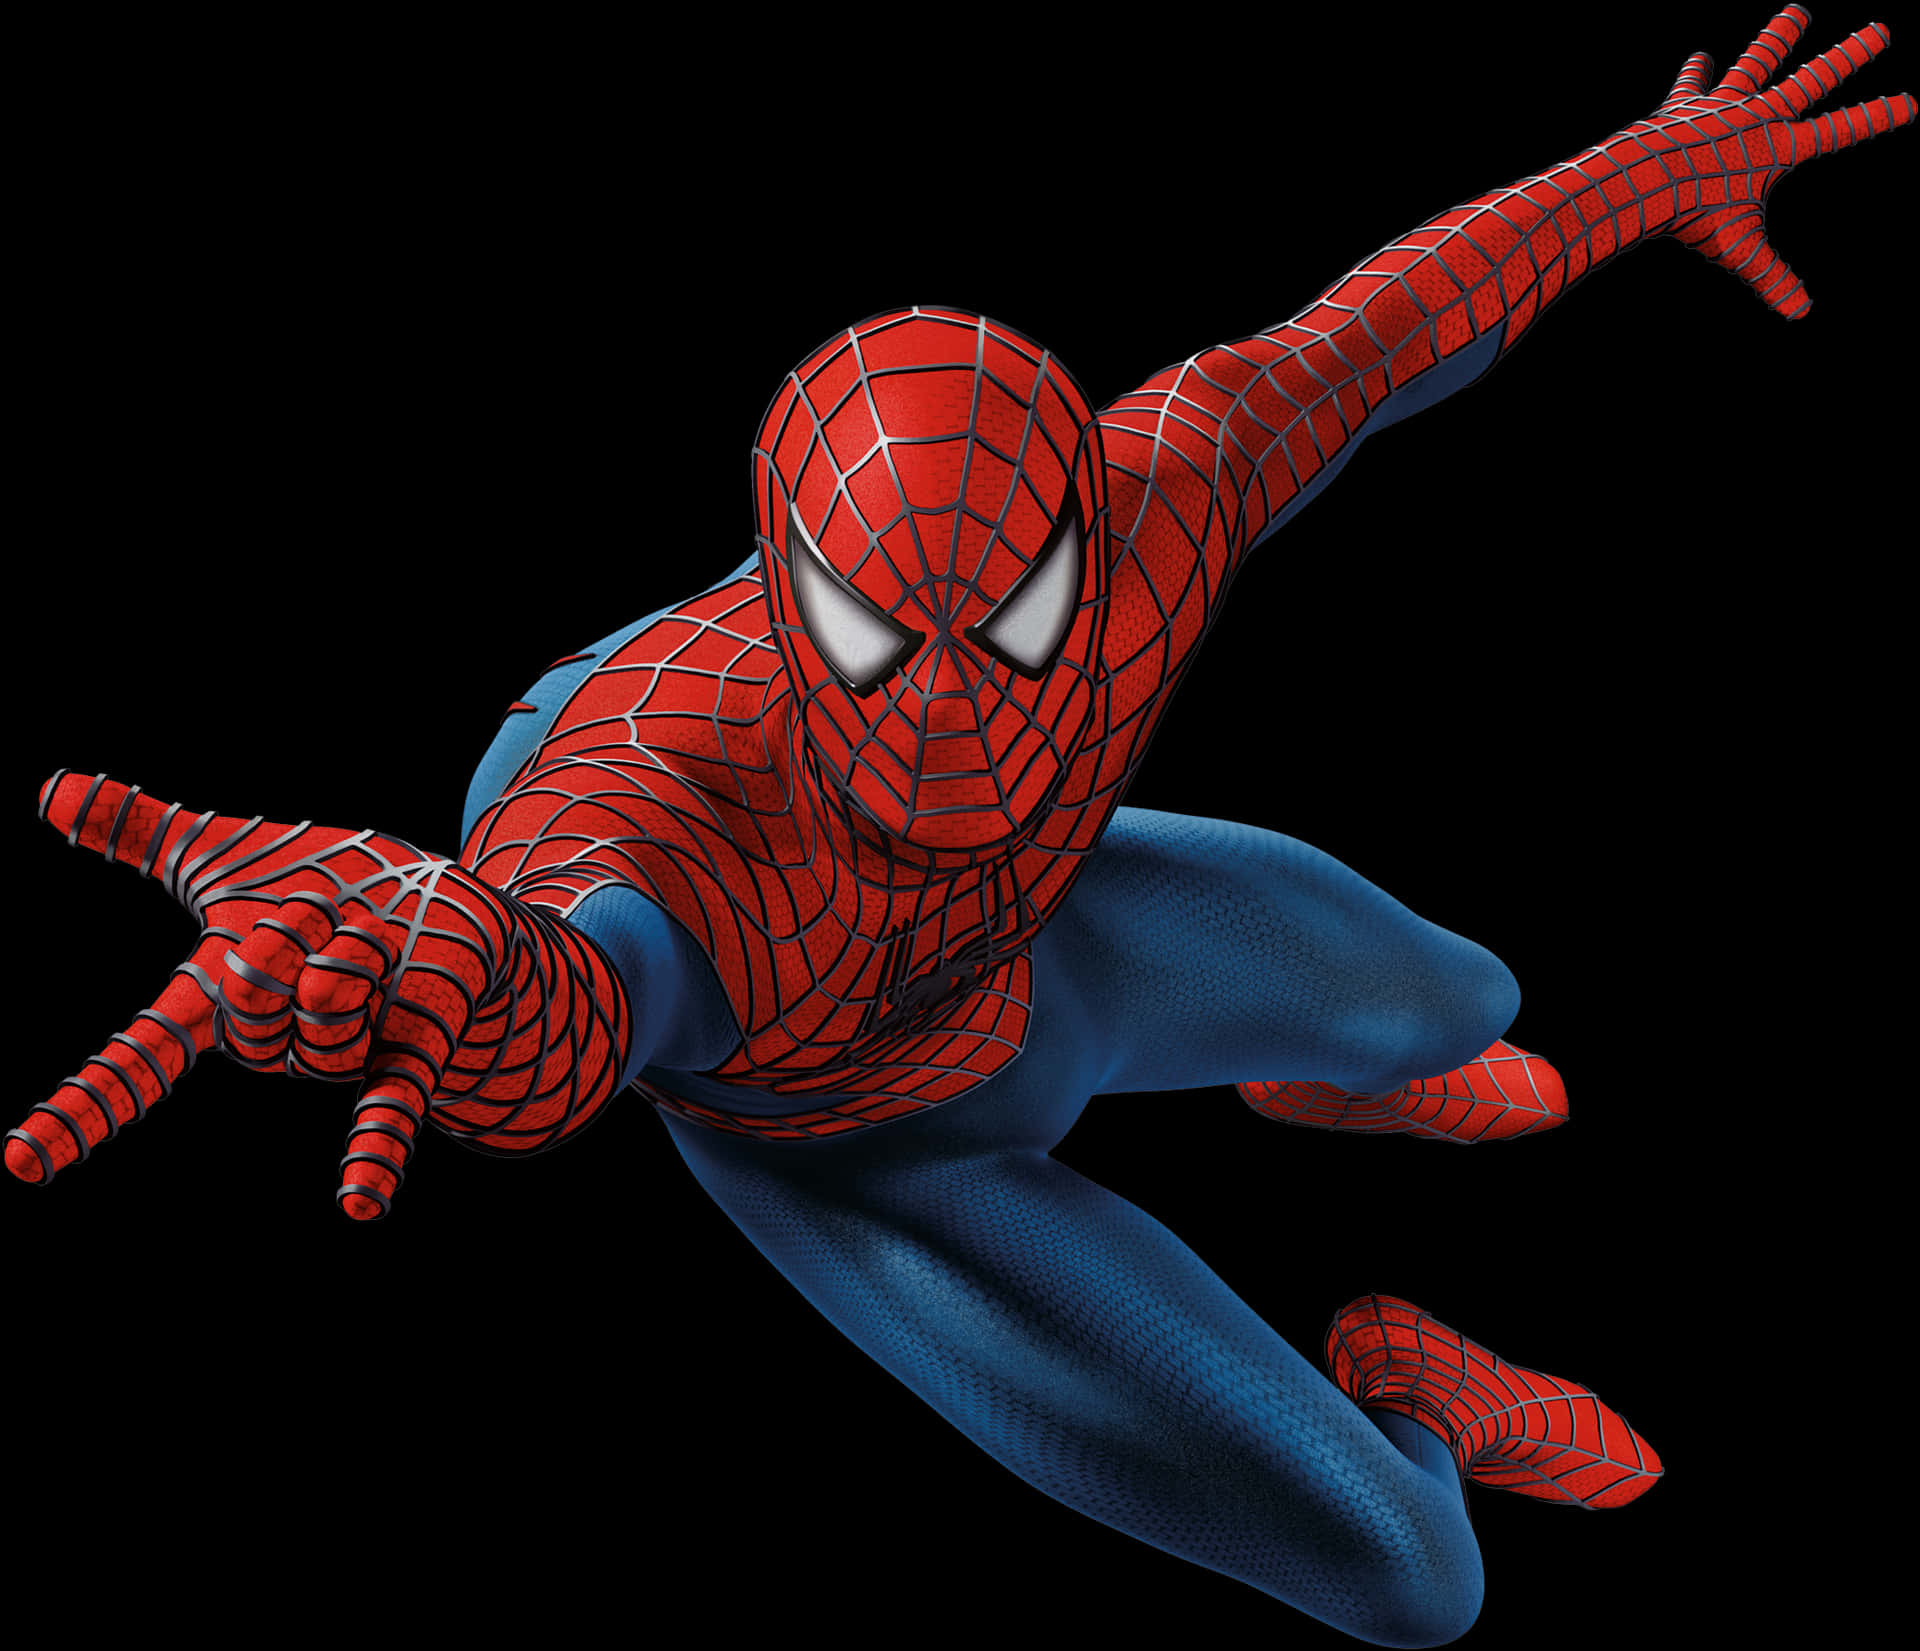 Spiderman Swinging Action Pose PNG